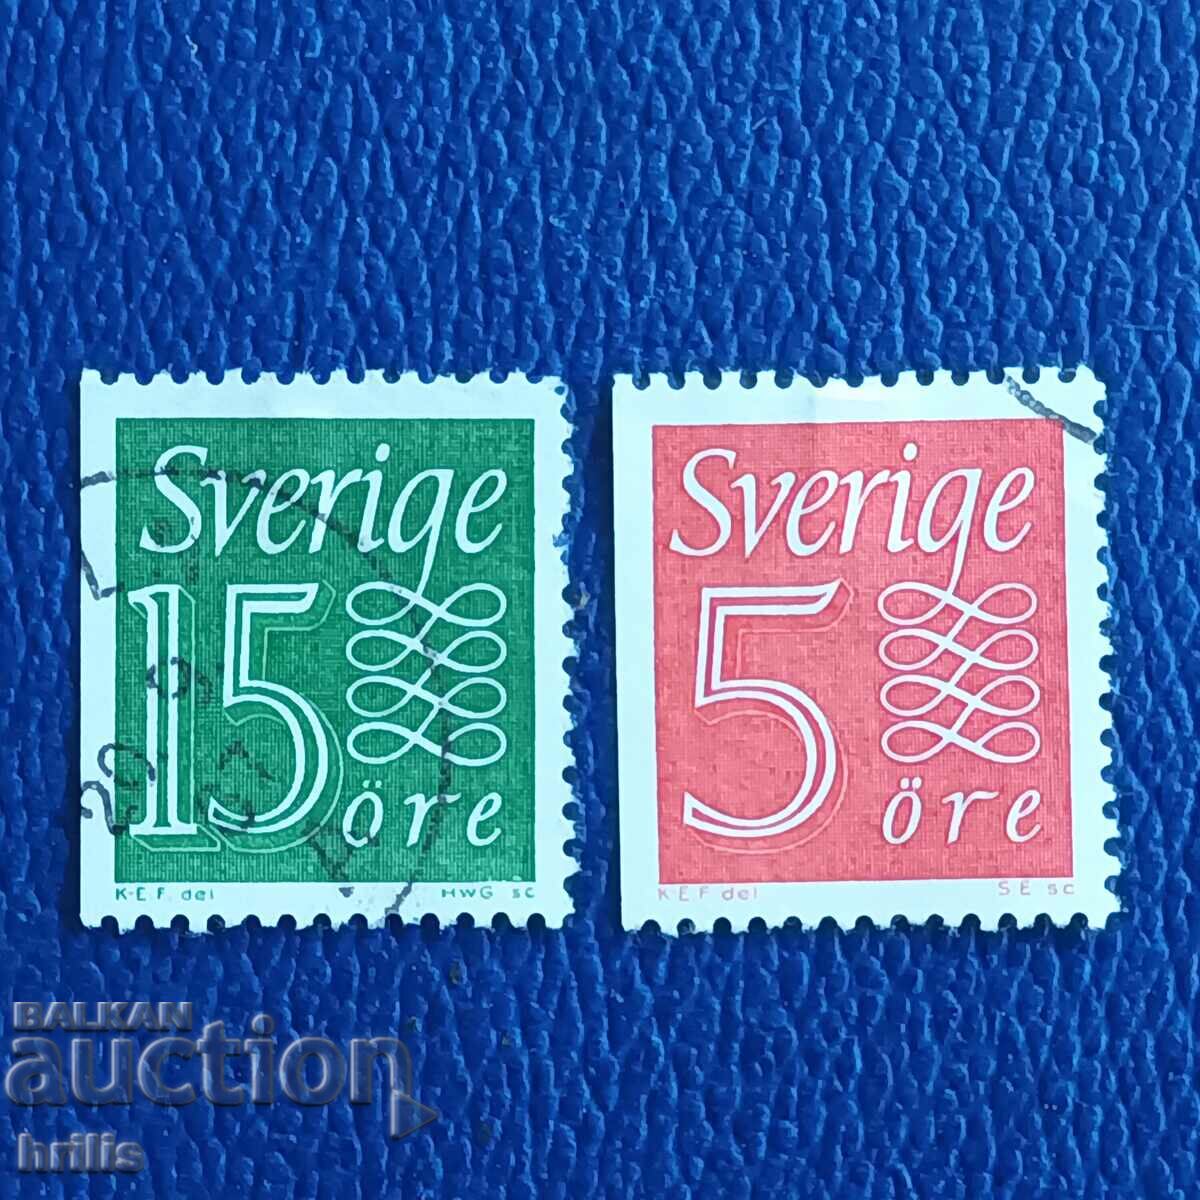 SWEDEN 1967 - TWO STAMPS